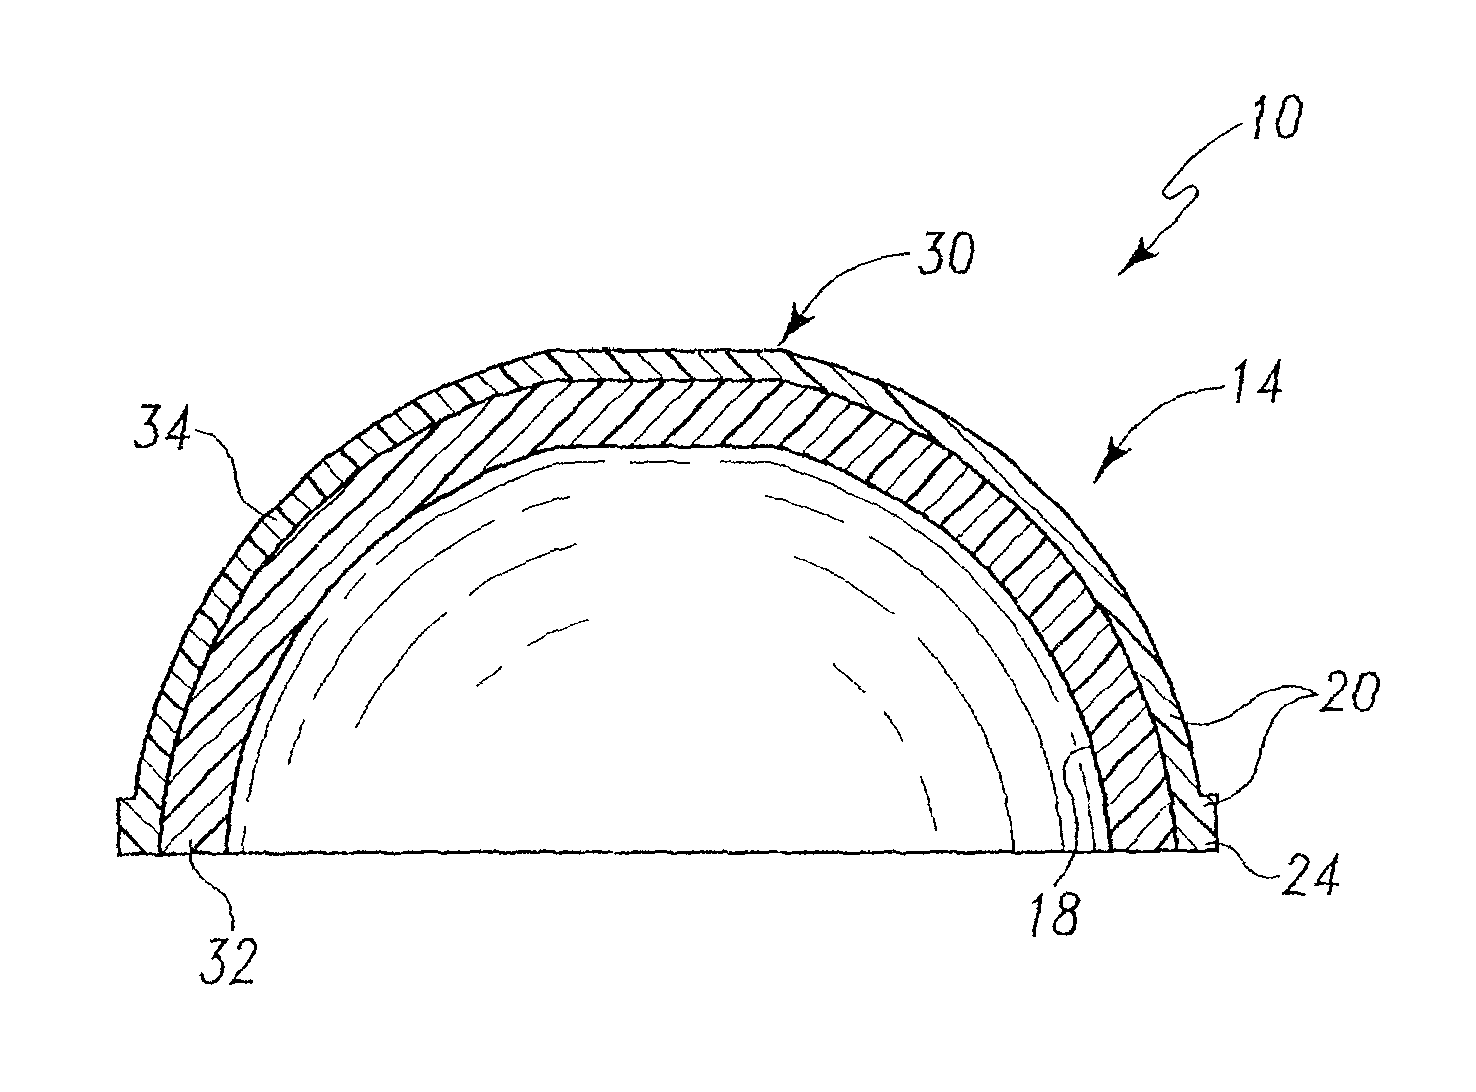 Composite prosthetic bearing having a crosslinked articulating surface and method for making the same